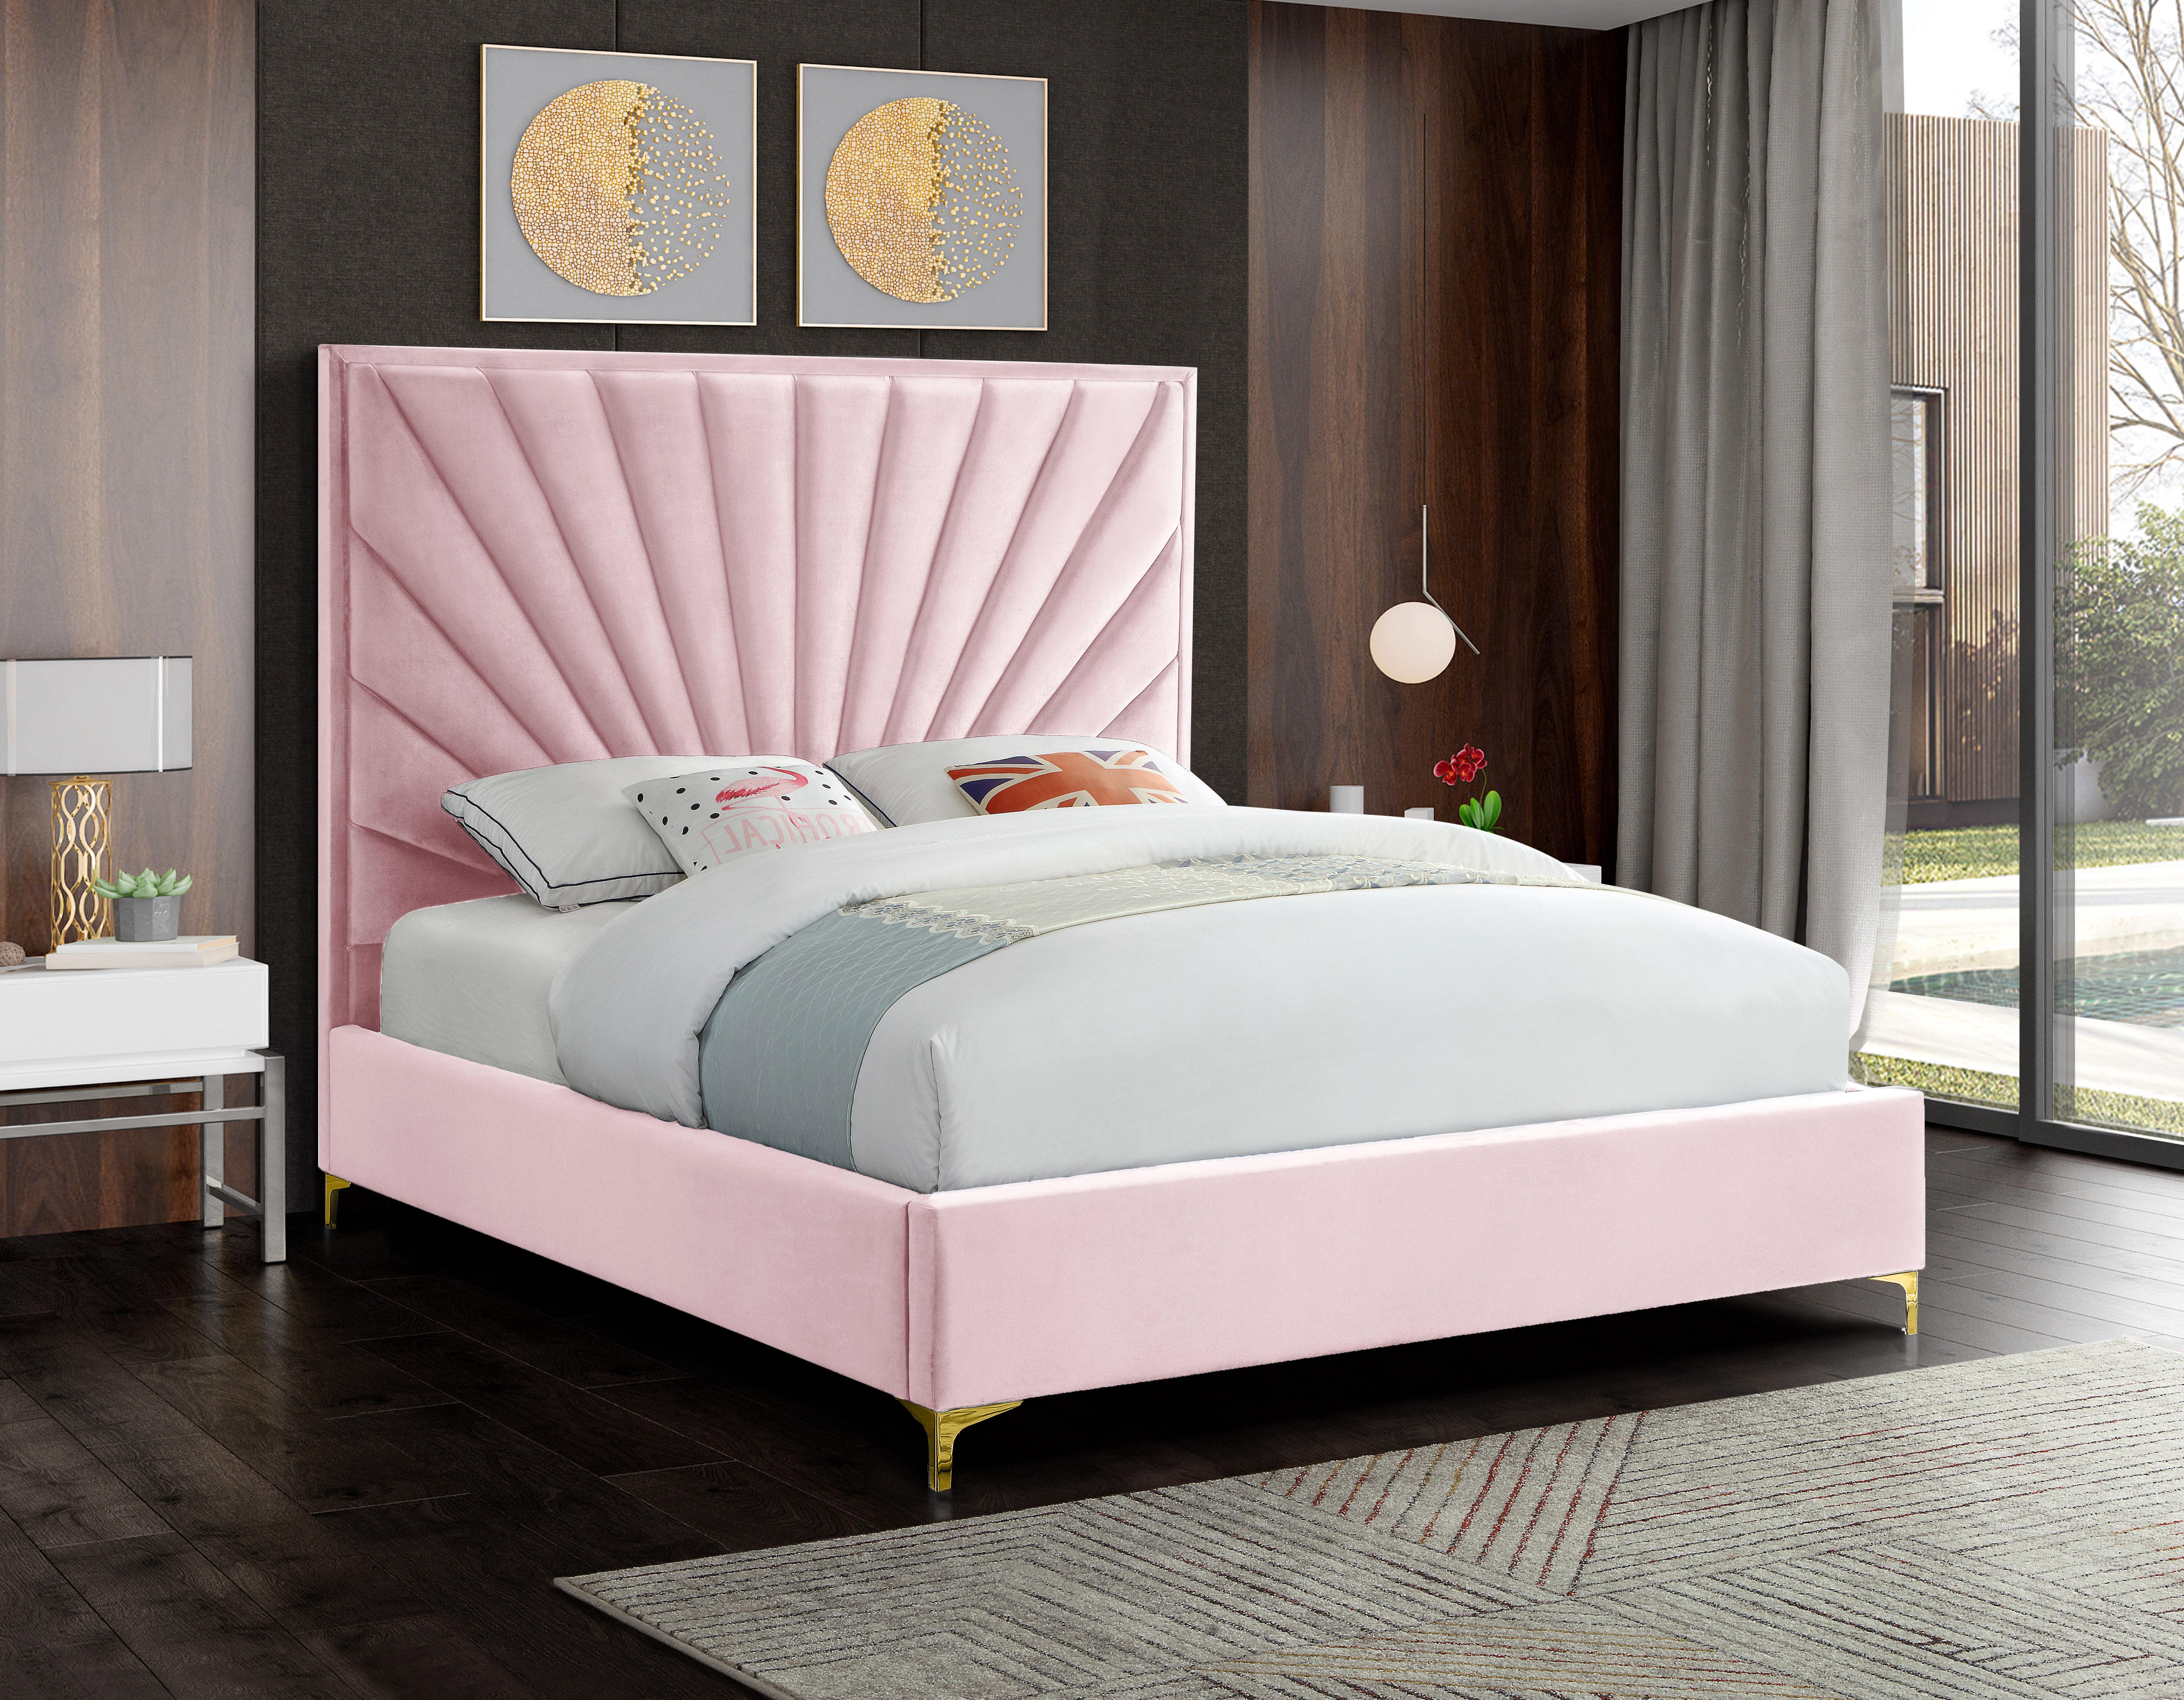 

    
Luxurious Pink Velvet Tufted Full Bed ECLIPSE Meridian Contemporary Modern
